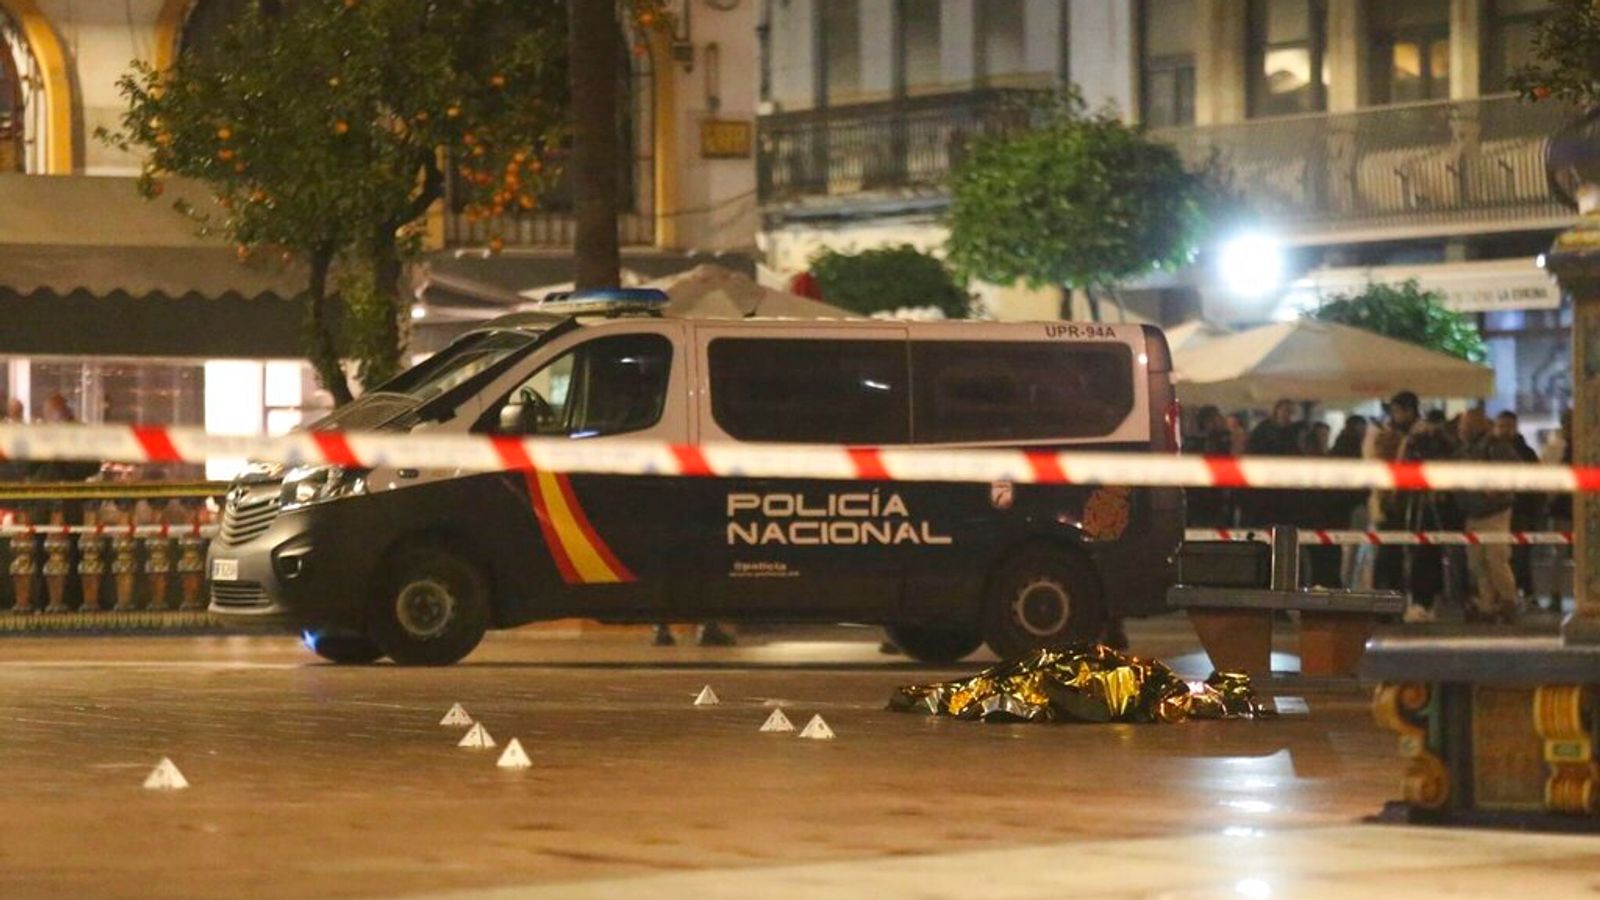 At least one dead and several injured in southern Spain church stabbing | World News